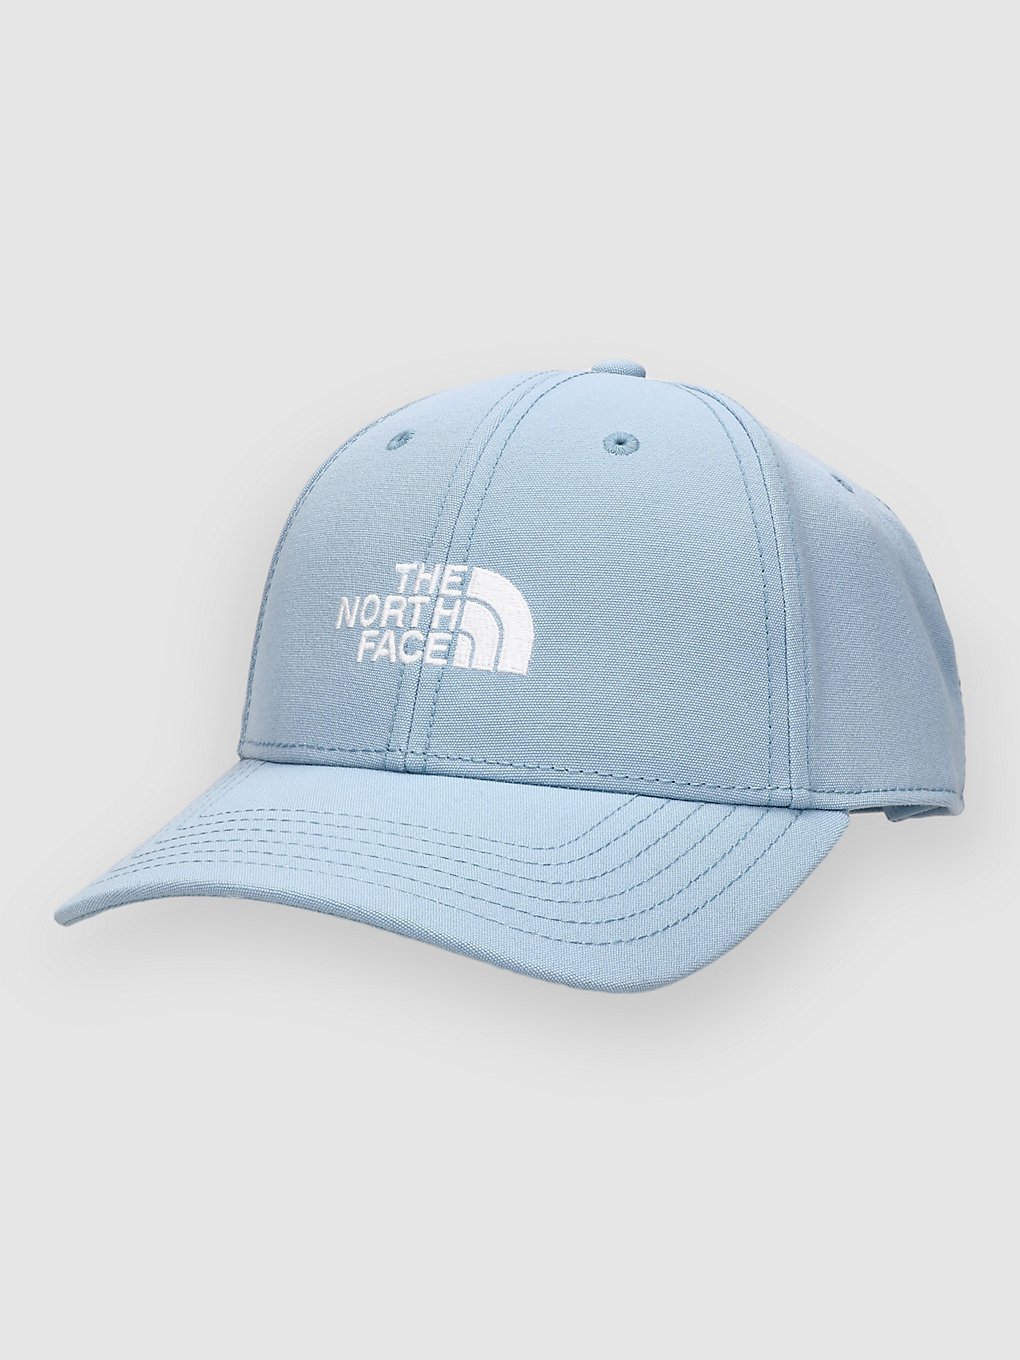 THE NORTH FACE Recycled 66 Classic Casquette bleu